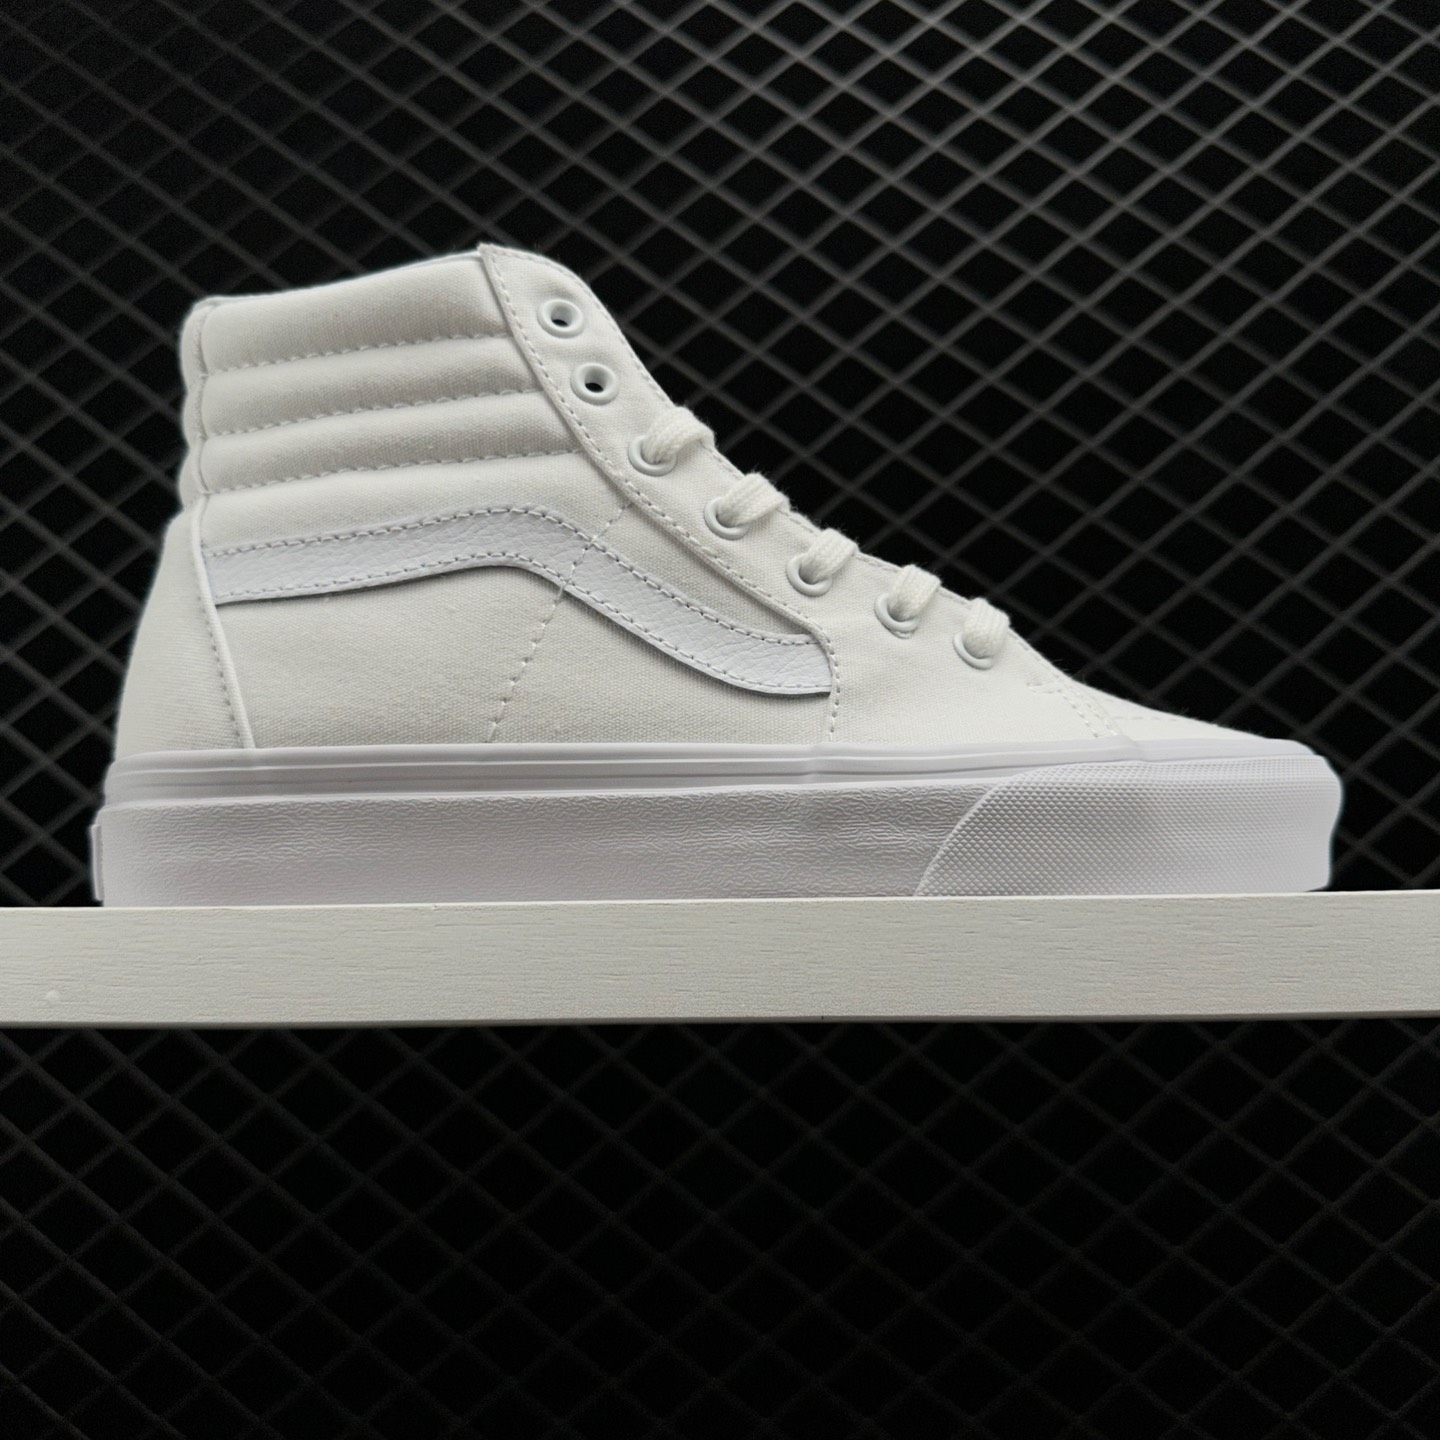 Vans SK8-HI True White VN000D5IW00 - Classic High-Top Style & Clean White Finish